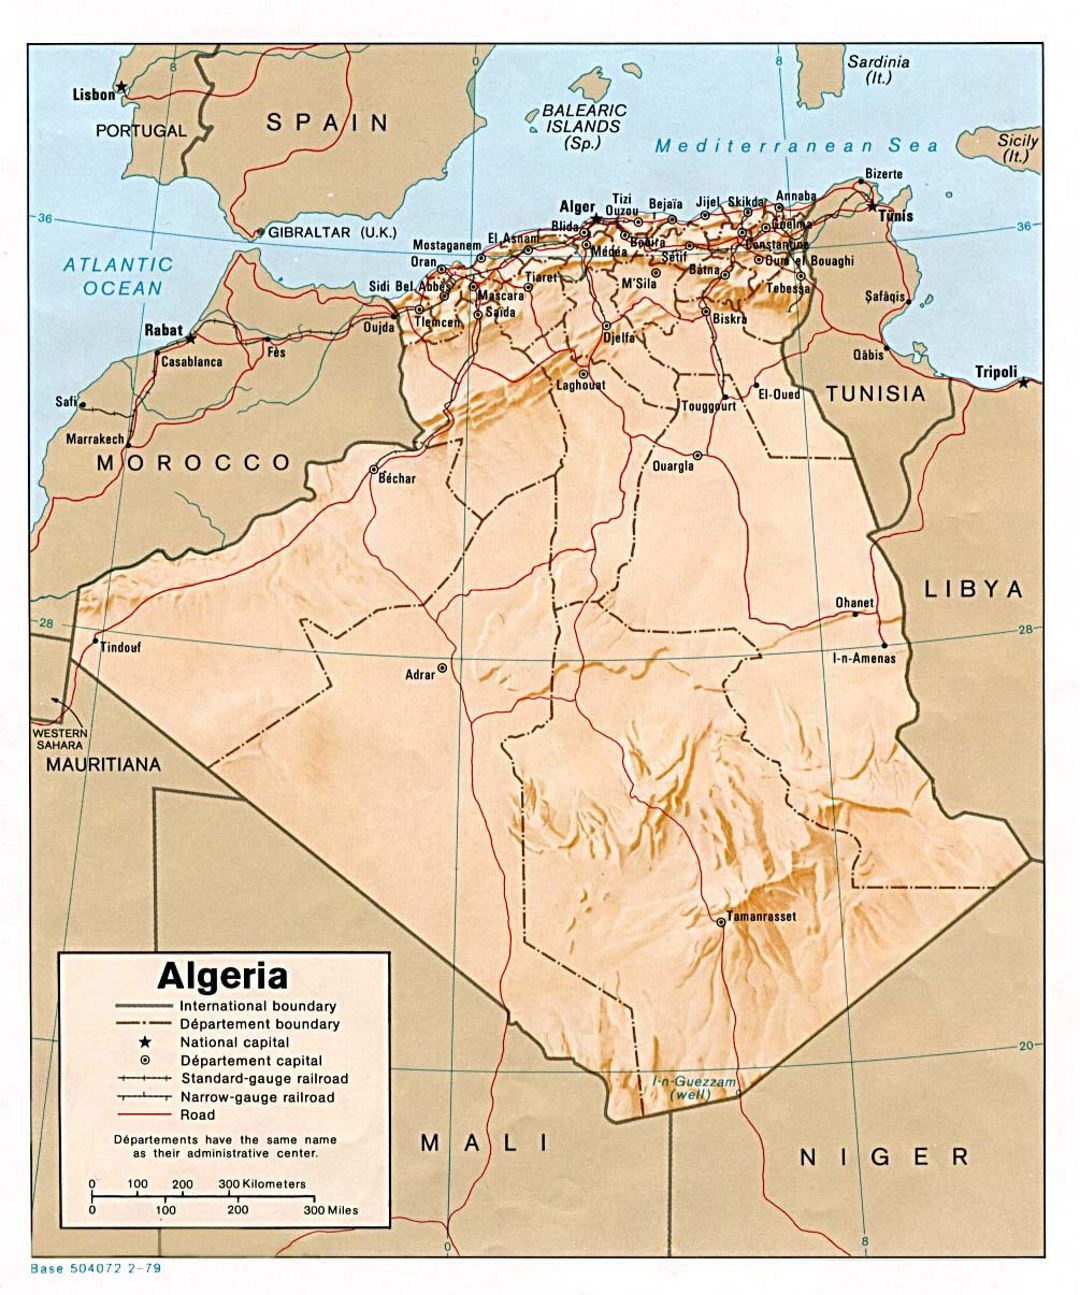 Detailed political and administrative map of Algeria with relief, roads, railroads and major cities - 1979